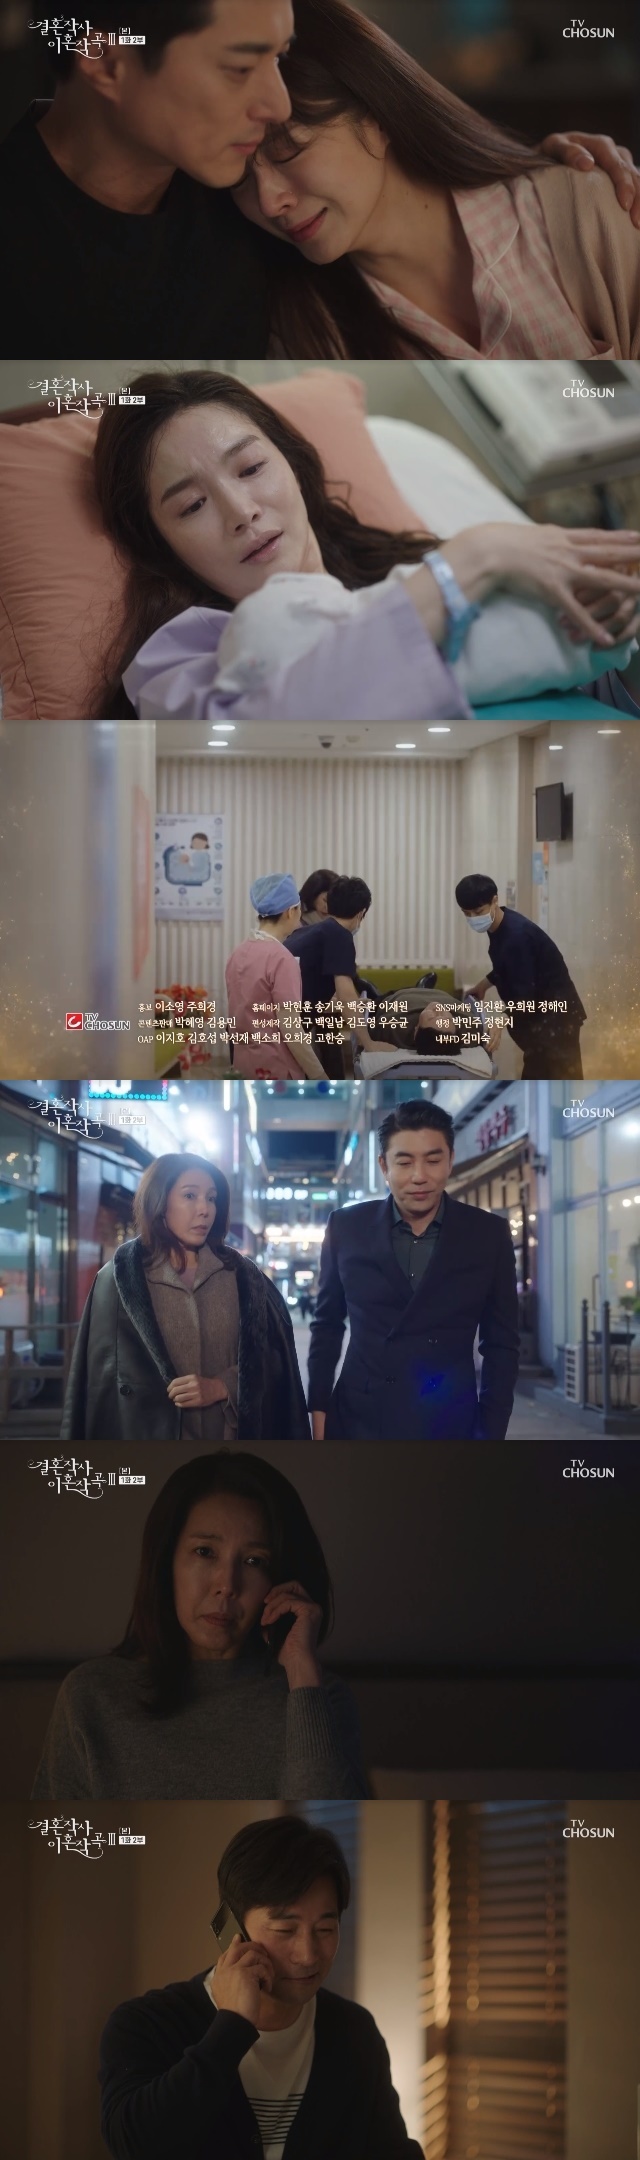 The adulterous man and woman began to be punished.On February 26, the first TV drama Drived Composition 3 of Marriage Writing (Phoebe, Im Sung-han), directed by Oh Sang-hoon, was shown in the first episode of the new weekend drama The Man and Woman of the Unhappy that started to suffer unfortunate things one by one.Kim Dong-mi (Lee Hye-sook) deliberately brought her granddaughter Jia (Park Seo-kyung) home on the day.Shin Yu-shin (Ji Young-san) had her daughter witness Ami (Song Ji-in), who is living with Shin Yu-shin as she was terrible, and through this, she was planning to drive Ami away from her home.Fortunately, Safi-young (Park Joo-mi) noticed this first.Before confronting Ami, Safiyoung chased Kim Dong-mi after safely taking Jia out of the house and burst into anger at her actions that would hurt her to fill her self-interest.Stop using your hair, Safiyoung warned, asking bluntly, Honestly, what Feeling is it (to Shin Yu-sin)?Safi Young said, Thankfully, I went out on my feet and if I went out to Ami, I would take the mother of Shin Yushin.Shin Yu-shin and Ami, who had been out while they were fighting, came home, and Shin Yu-shin was more angry and jealous of the fact that Safi-young was drinking now than the reason they were fighting.Meanwhile, Ami, who knows Kim Dong-mis true color, explicitly sided with Safi-young, who also told Safi-young that she would go out if she told her to finish.Ami had more unpleasant things to do with her. On that night, she cried to Shin Yusin, announcing her obituary that Dad died.It was news that Amis biological father, Cho Woong (Yoon Seo-hyun), was paralyzed after being hit by a falling horse and died last Monday.Amid Amis grieving, news of Chos sudden death has baffled viewers as well.On the other hand, Song Won (Lee Min-young) had a little early labor ahead of the week of birth.While Judge Hyun (Kang Shin-hyo), who had been contacted, rushed Songwon to the hospital, Panmunho (Kim Eung-soo) and So Ye-jeong (Lee Jong-nam) tried to accompany them, but Panmunho suddenly felt pain and went to the hospital.Panmunho, who suffered from diarrhea, showed a child in the birth of his grandson when the ship became quiet.At that time, the hospital had a son after a long labor, and Panmunho, who received the news, was happy to hide his heart, but in the trailer, the tragedy came with joy.Panmunho, who visited the hospital, fell down and lay on the hospital bed. Soon the doctor covered the white cloth to the end of someones head, and the judge said, Do not touch it.I cant go. He showed his hand blocking. The news was told that Judge Hyun was awarded.There were various speculations about whether the person who died on the day of the accident was Panmunho or the baby born.Lee Si-eun (Jeon No-Min) who divorced Park Hae-ryun (Jeon Soo-kyung) seemed to have a new love. The main character was Seo-ban (Moon Seong-ho).The western half showed interest in Ishi Eun even in the place where he was set up to connect himself with Buhye-ryong, and that night he called Ishi Eun separately and drank accompaniment.The western half confessed to the past, saying, Ishi met us, after Ishiun took off his coat when he was cold.But Park Hae-ryun interrupted the two.Park Hae-ryun, who had been diving after being played by Nam Ga-bin (Im Hye-young), suddenly called Ishi-eun and said, You know a Korean clinic that puts a needle well?I woke up in the evening and found that Guan Wasa came to me. After hesitant, Ishieun said to Park Hae-ryun, Please give me an officetel and take a picture.